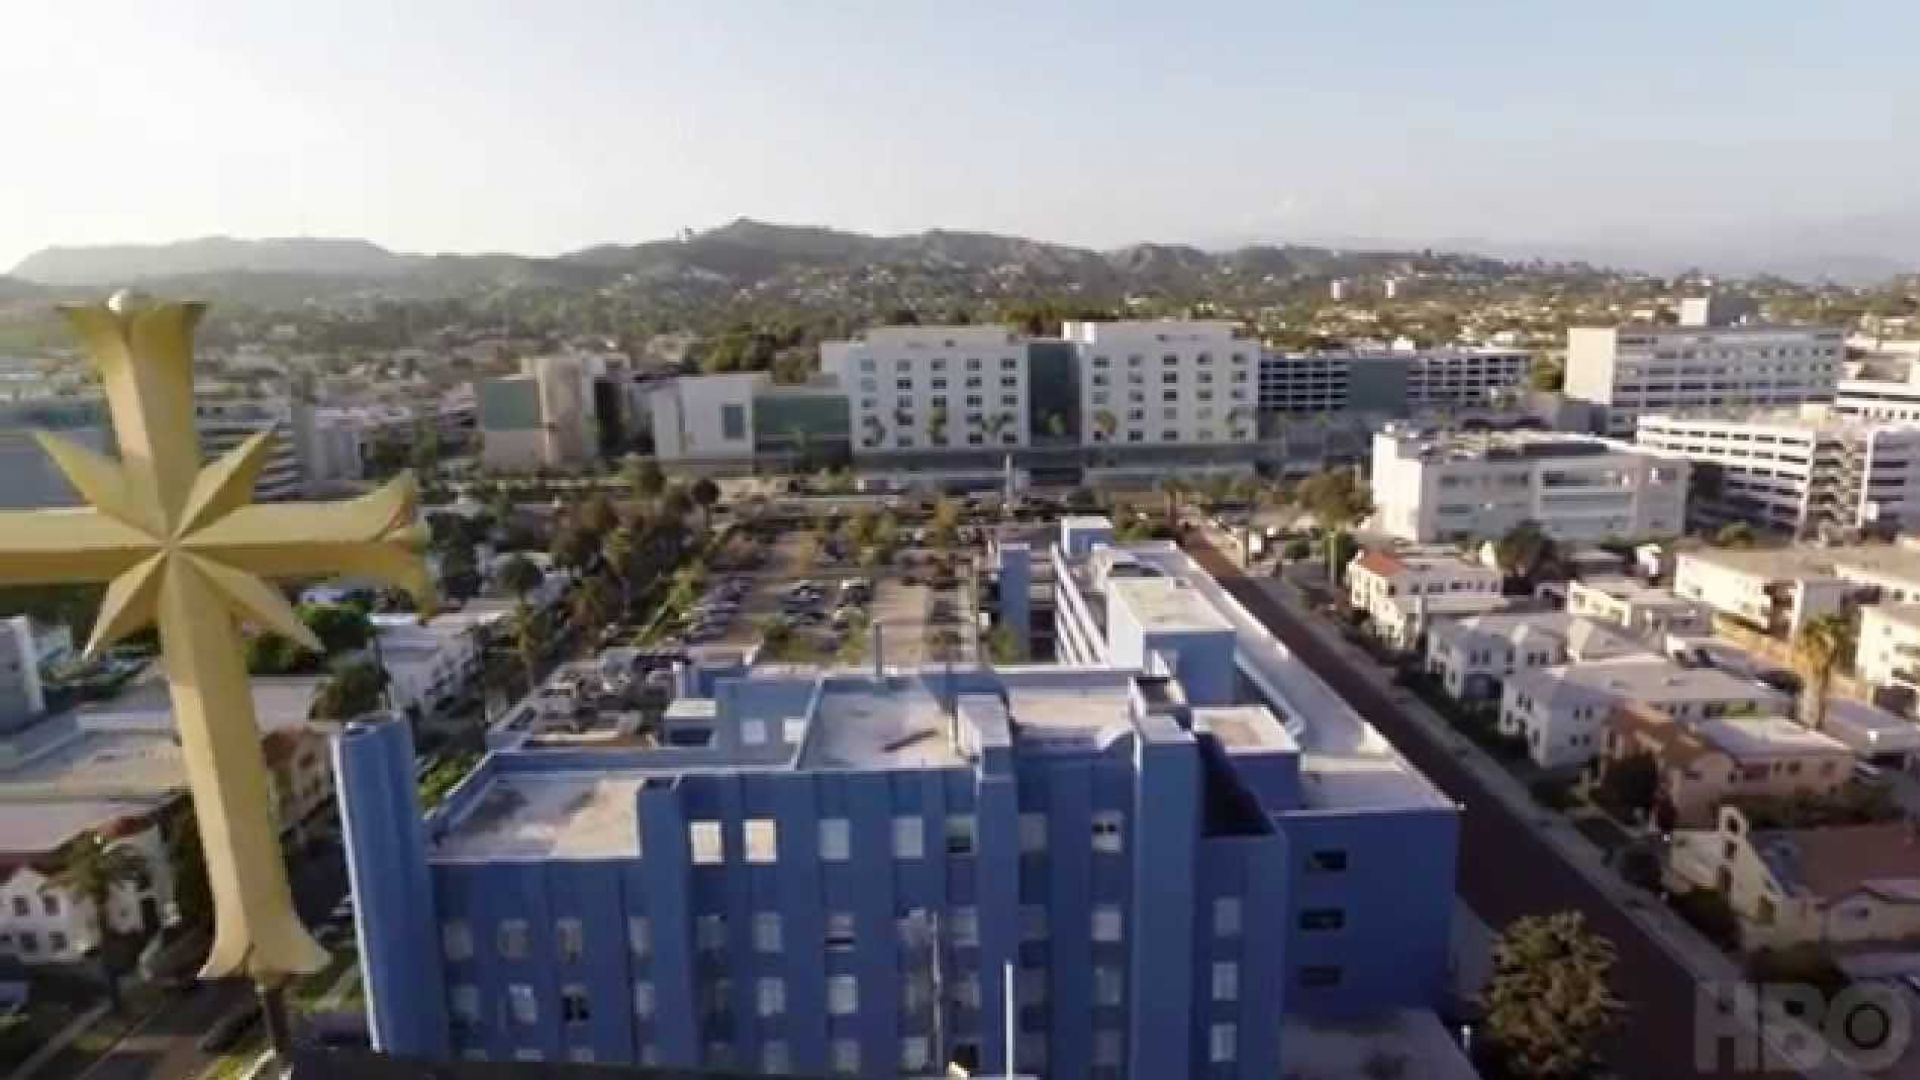 Official Trailer for 'Going Clear: Scientology and the Prison of Belief'